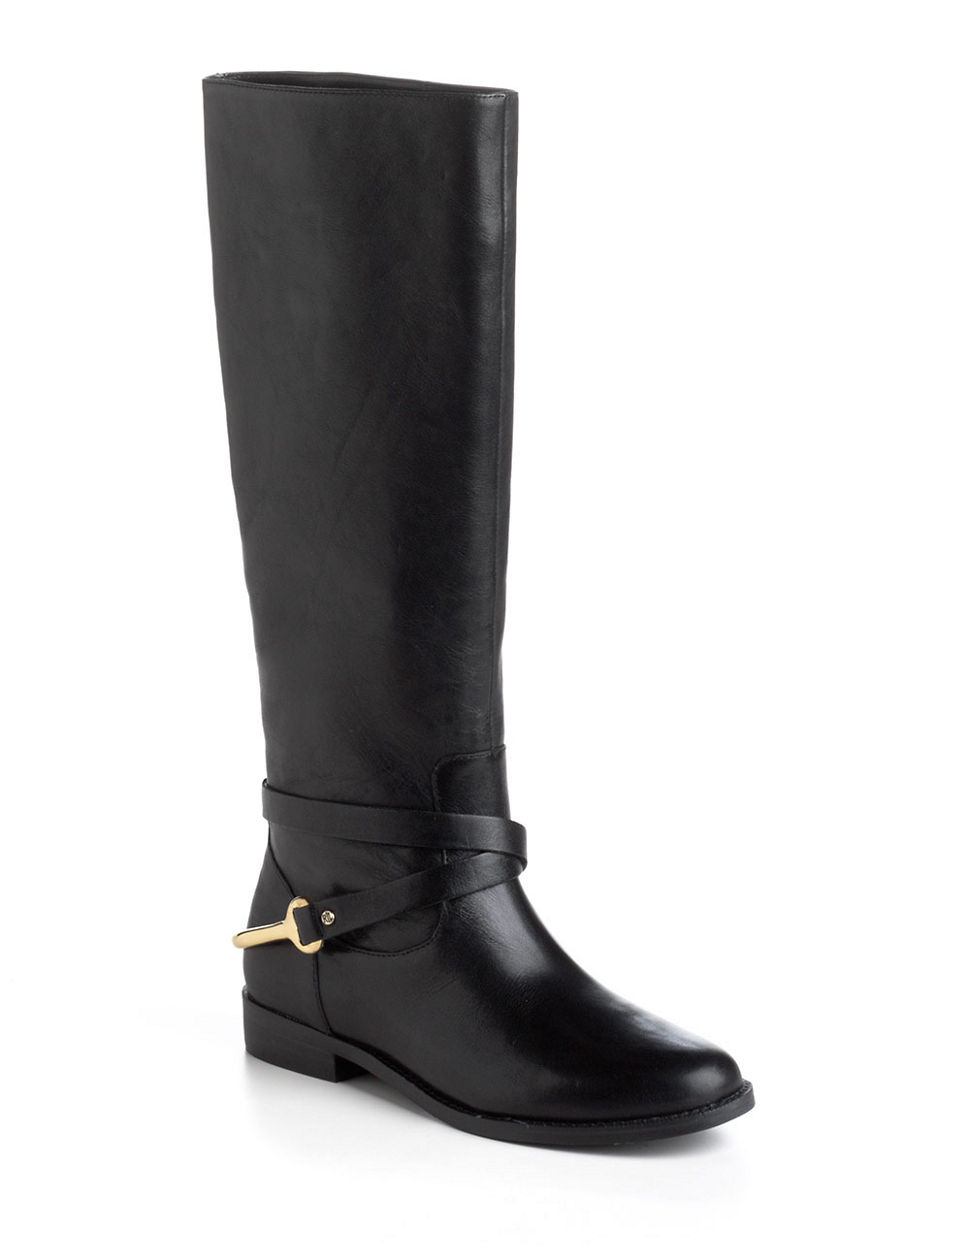 Lyst - Lauren By Ralph Lauren Jenny Burnished Leather Riding Boots in Black